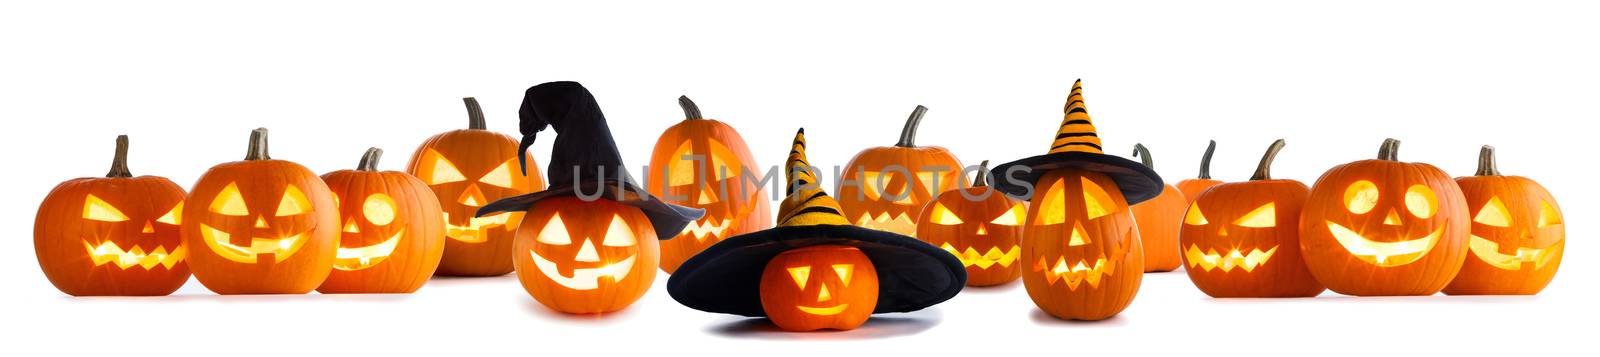 Big collection of Jack O Lantern Halloween pumpkins with various different designs and witches hat in a row isolated on white background